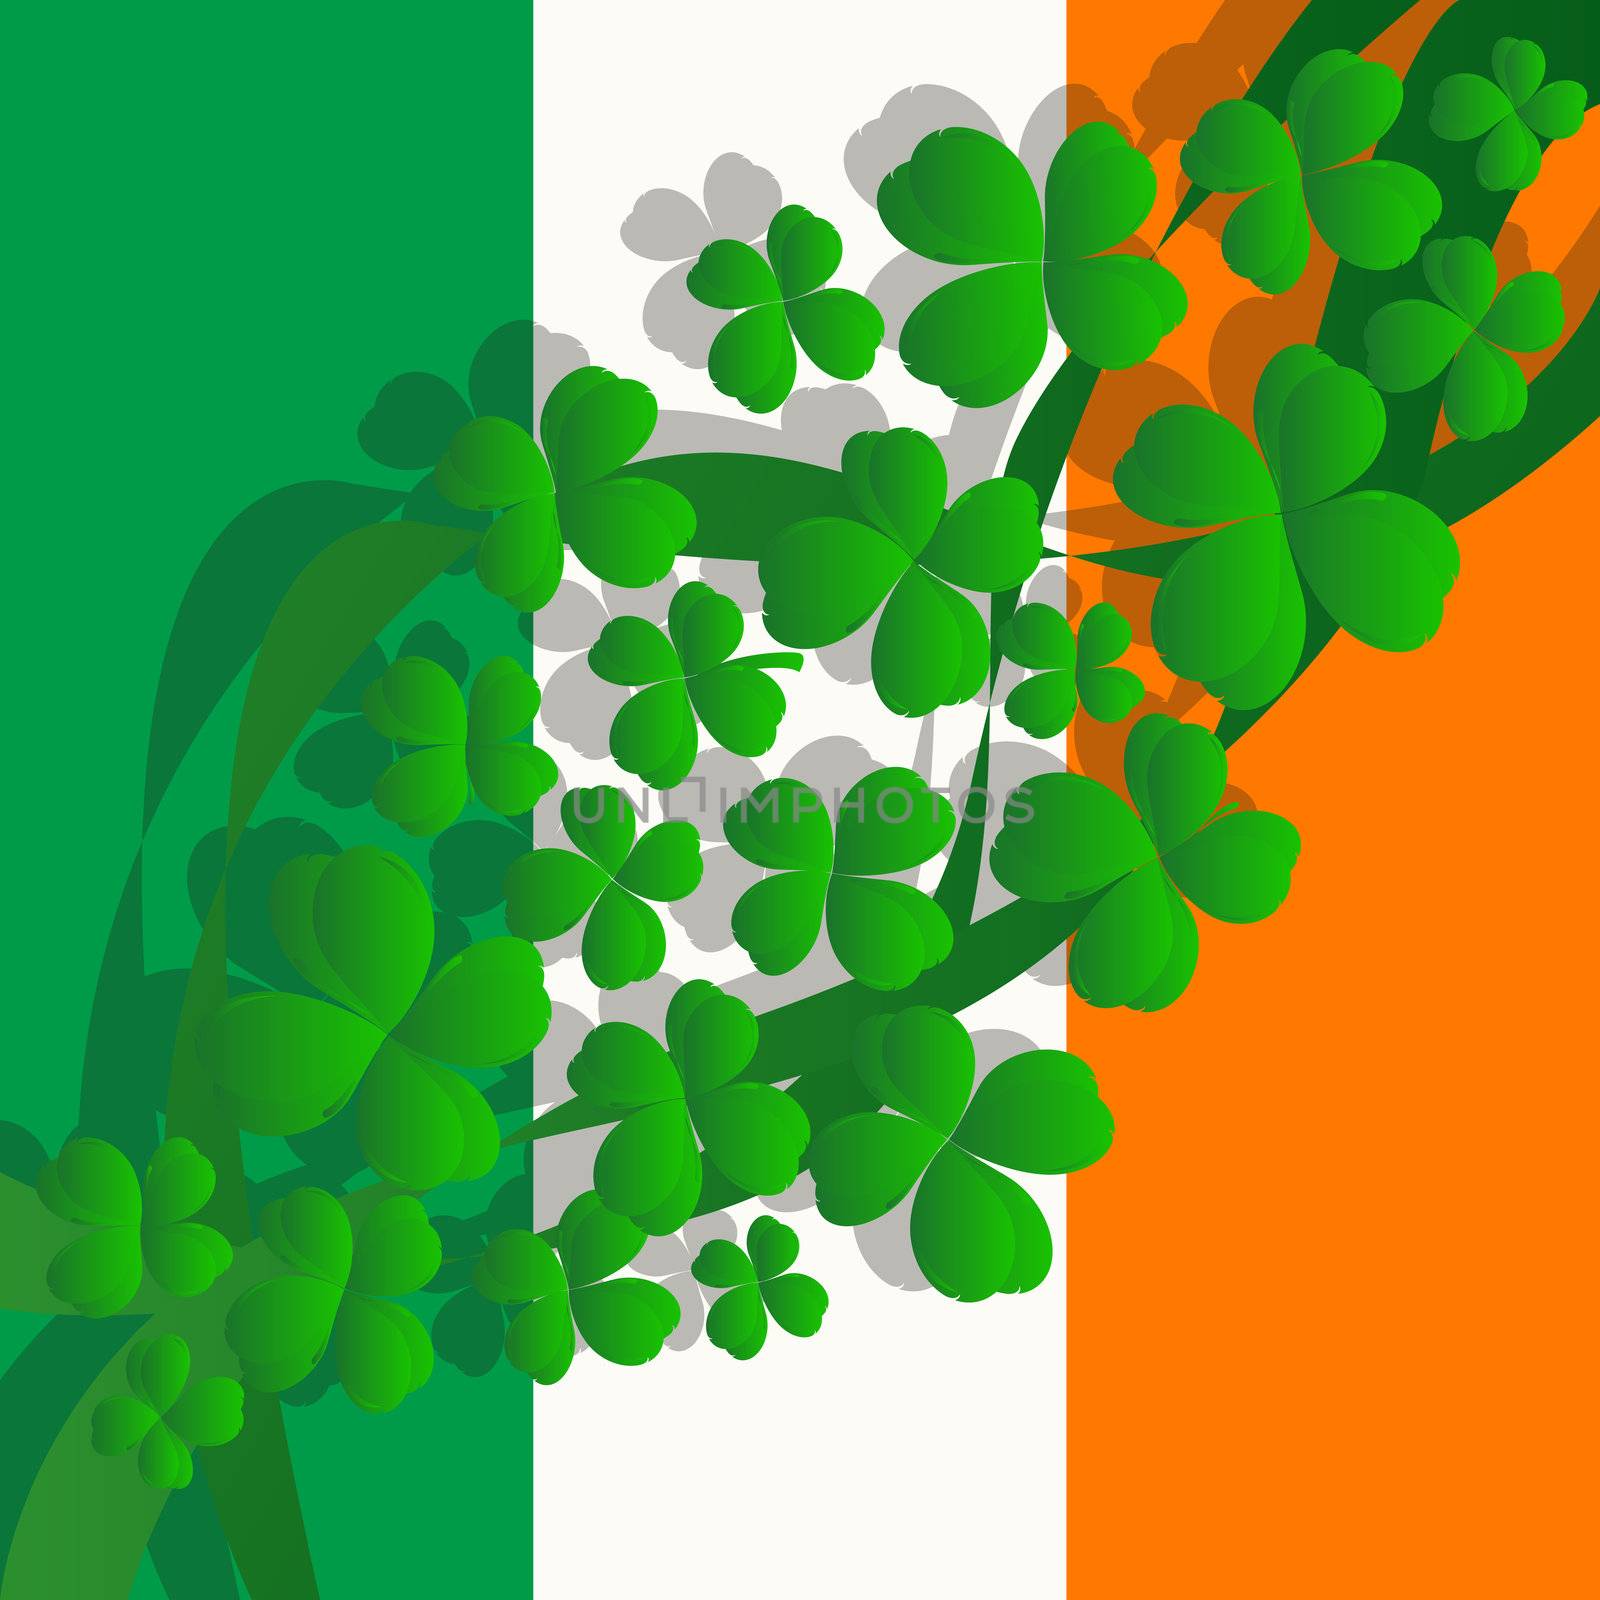 Design for Saint Patrick's Day with four leaves clover over Ireland national flag